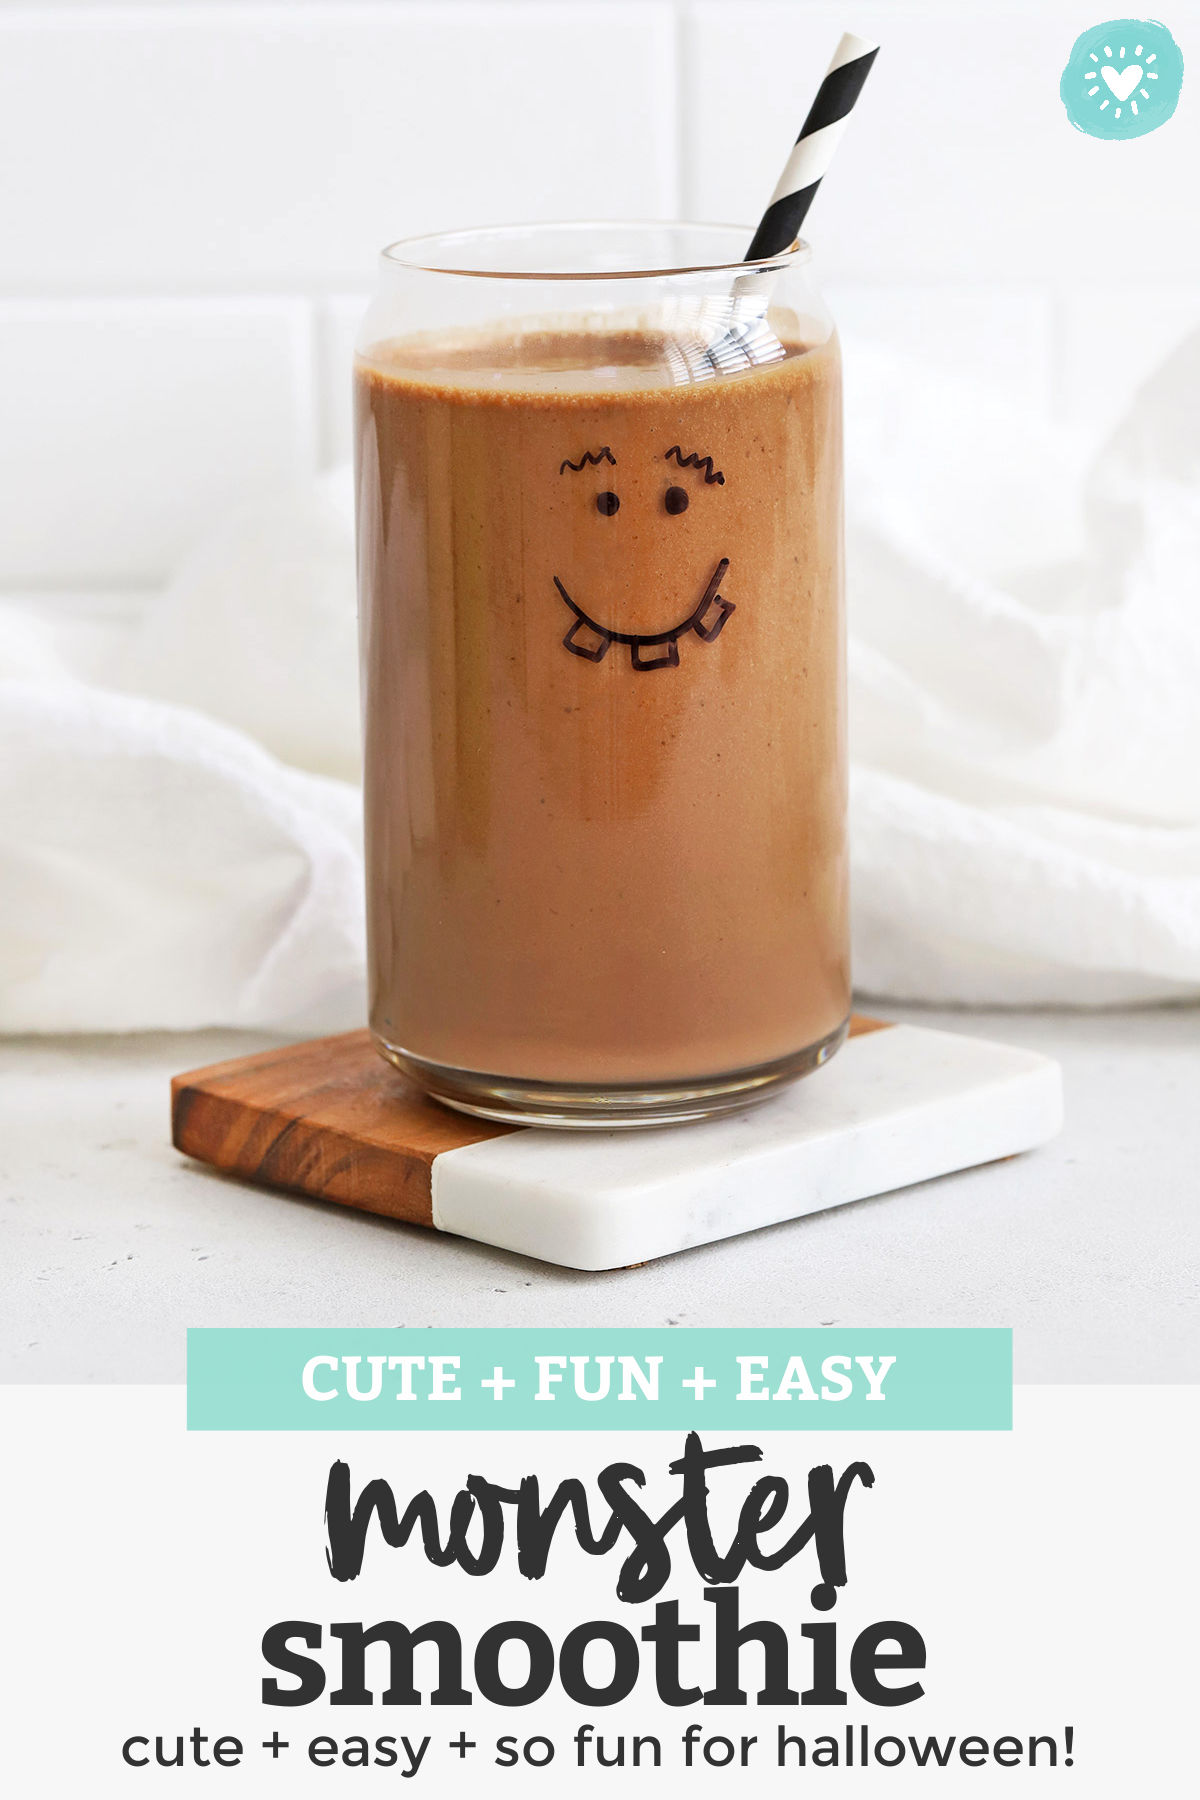 Halloween Monster Smoothies - Learn how to use a marker to make adorable monster smoothies on your smoothie cups. The perfect Halloween breakfast or healthy Hallowen snack! // Halloween ideas for kids // green monster smoothie // halloween party food #halloween #fallrecipe #halloweensnack #healthysnack